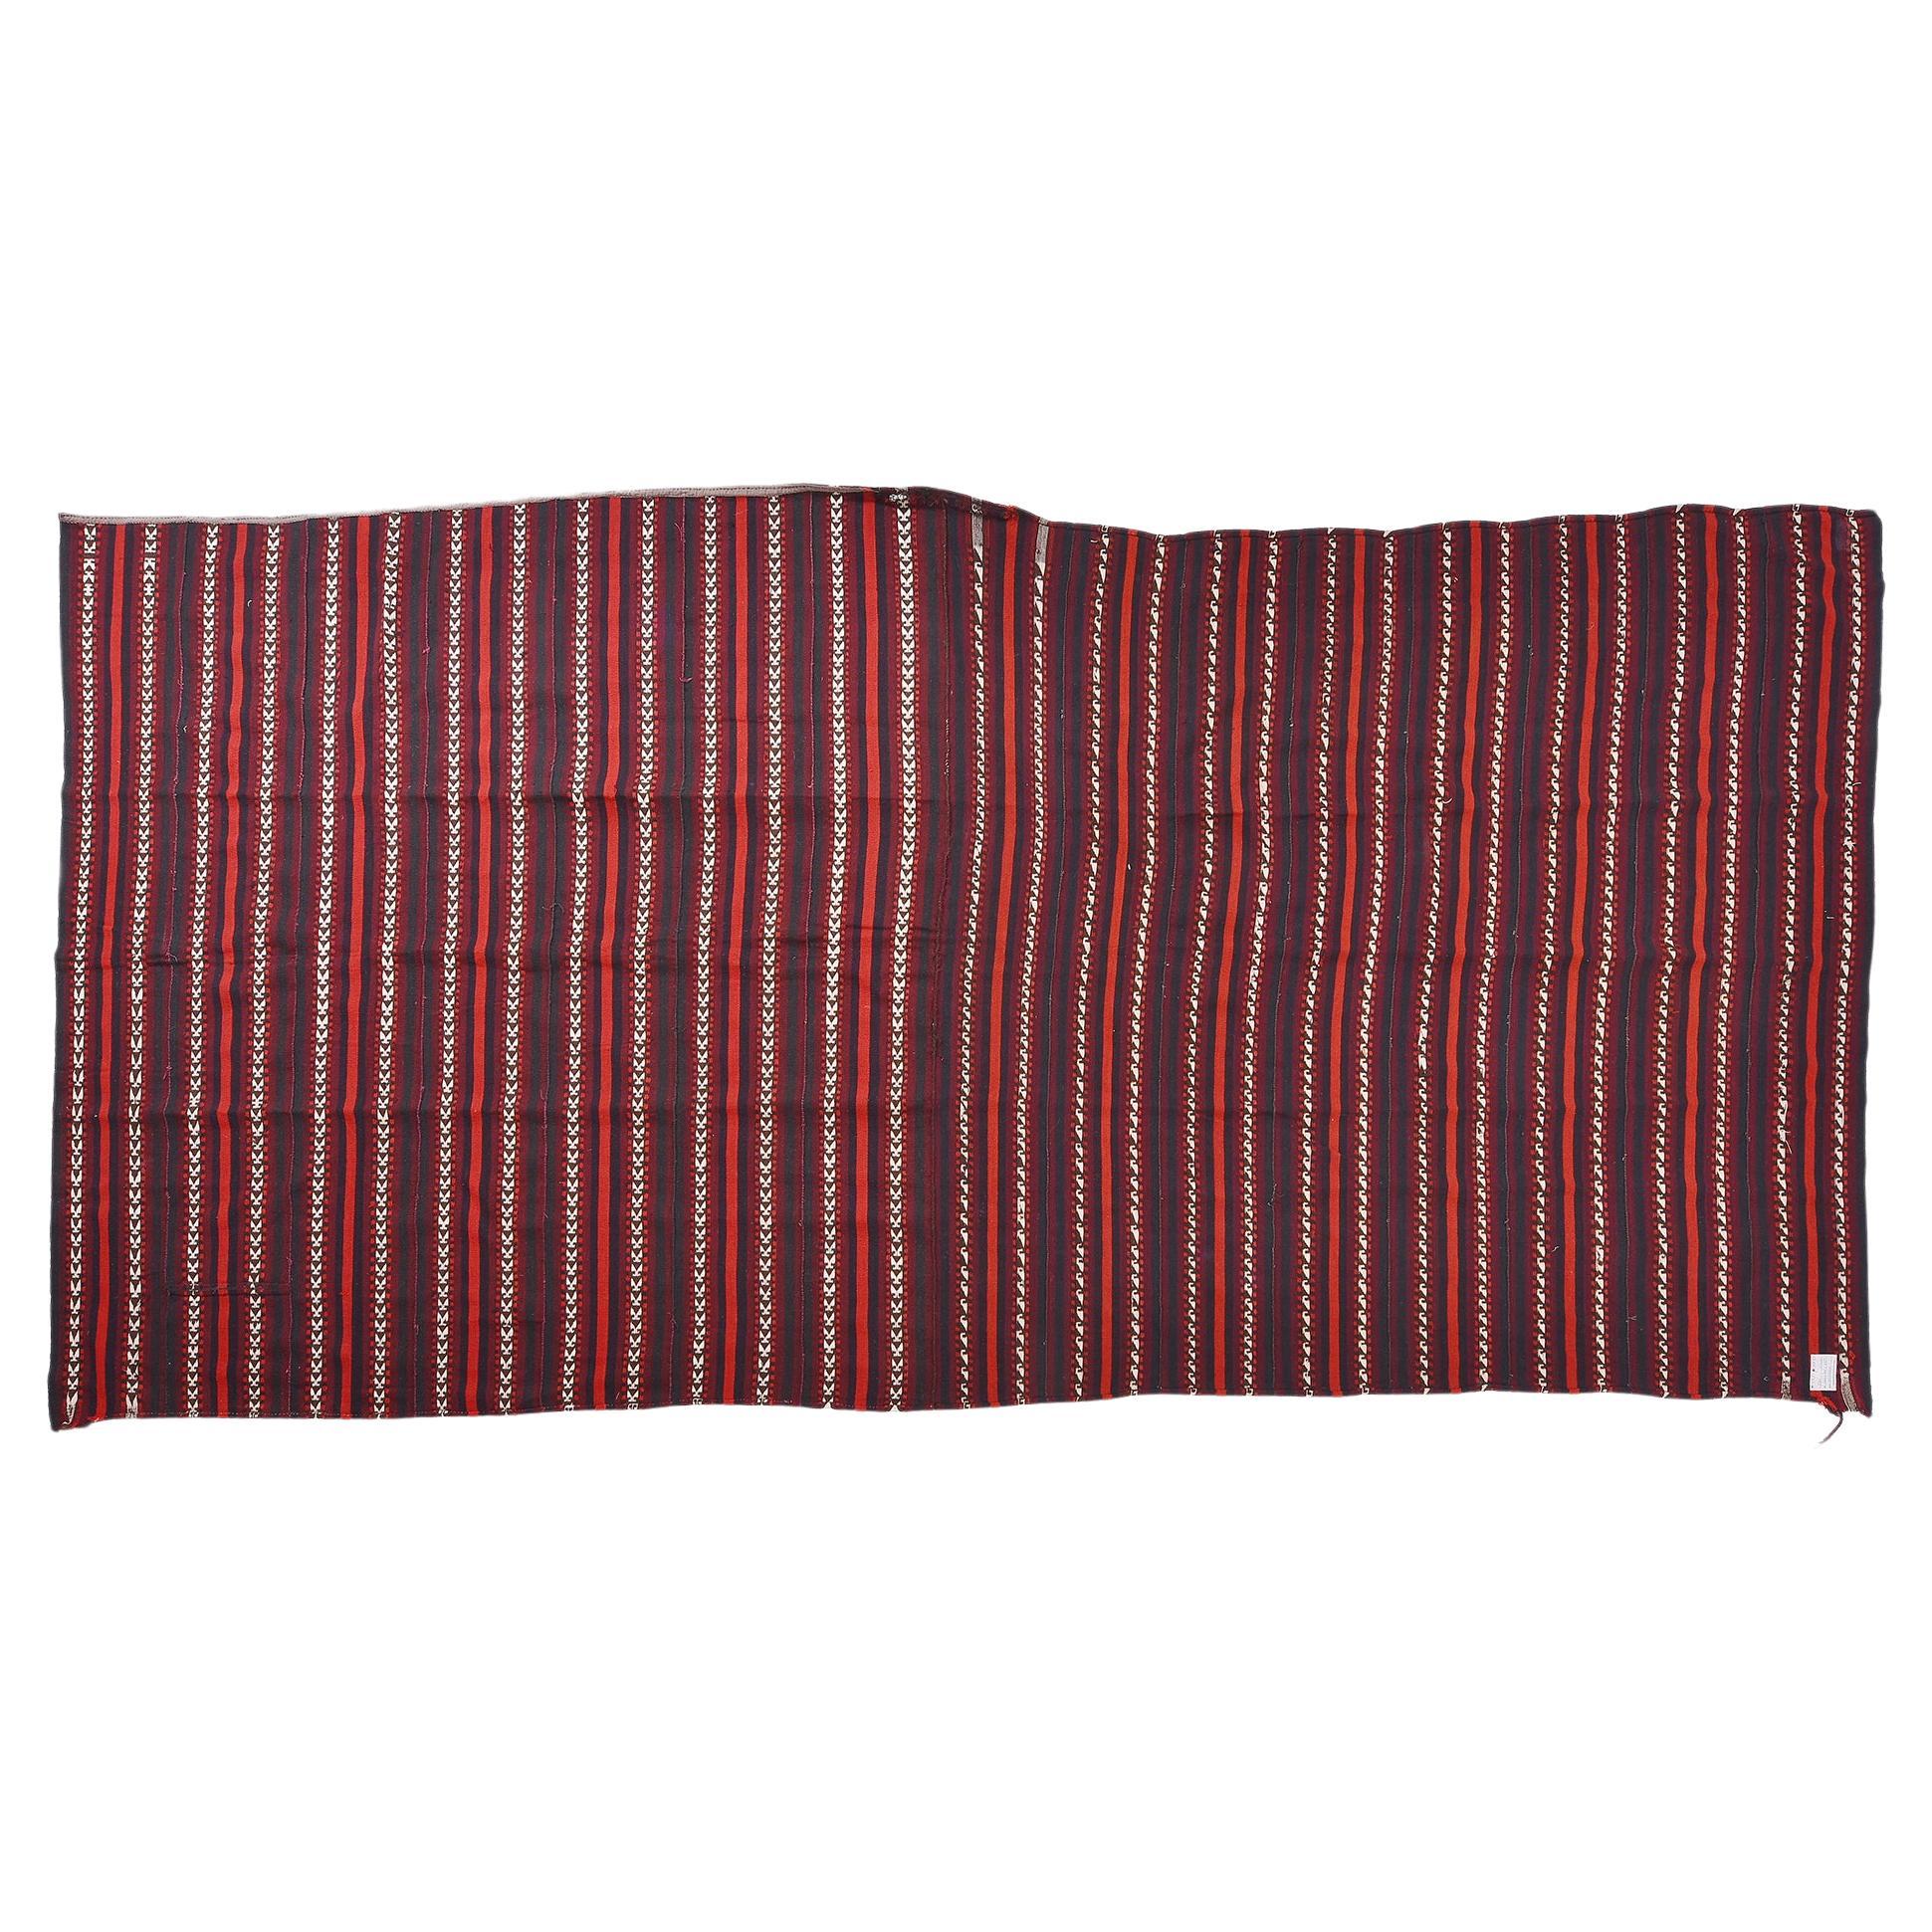 nr. 781 - Long kilim in excellent wool and dense hand weaving, made up of strips sewn together.
It's a typical nomad workmanship because they do not have large looms for transport: therefore they wave strips which then join together to make a large